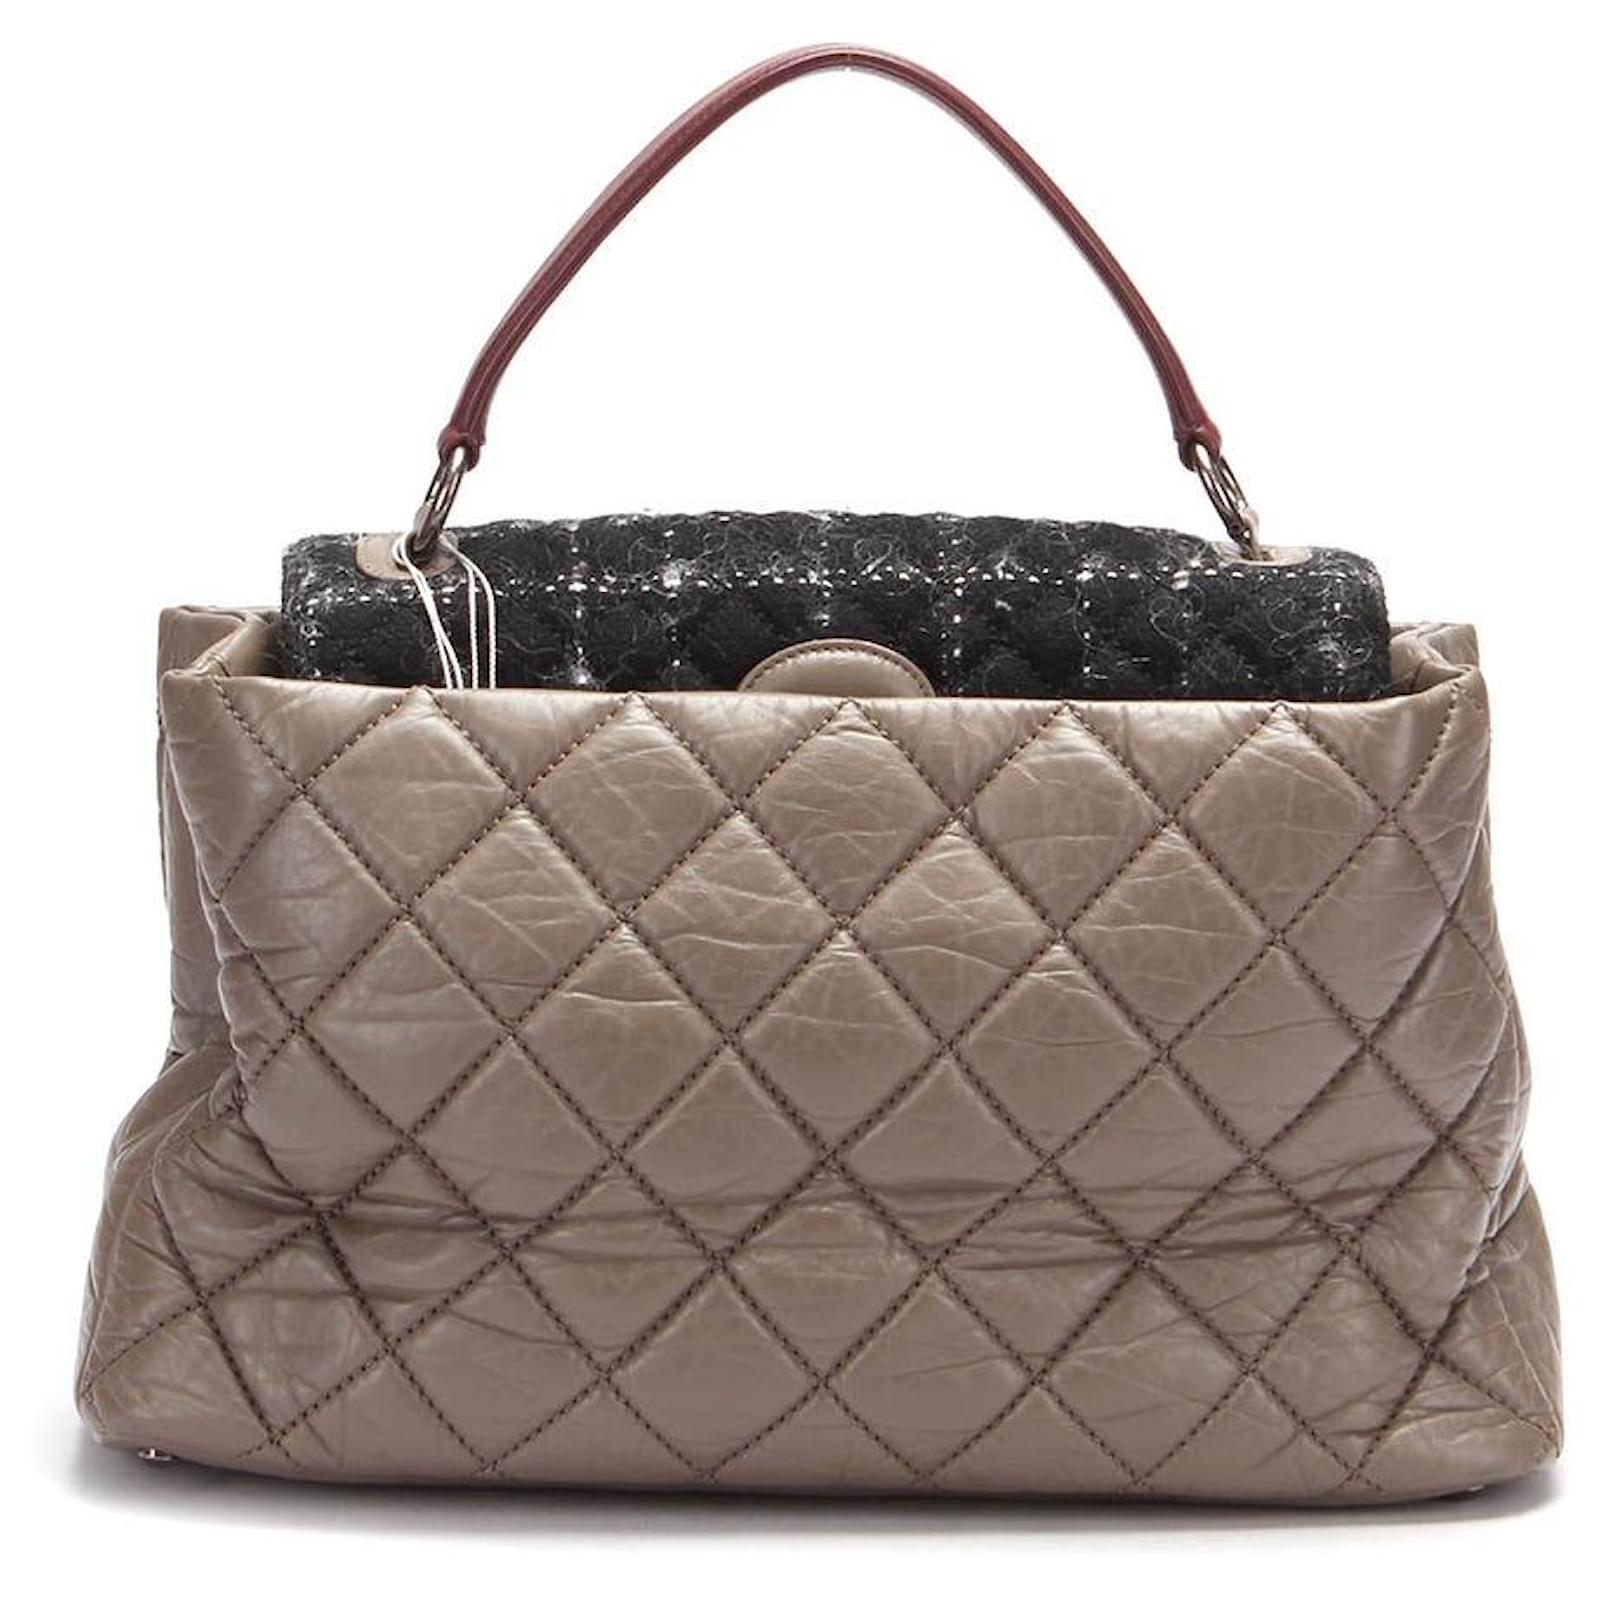 Chanel Quilted Portobello Tweed Frame Top Handle Bag Brown